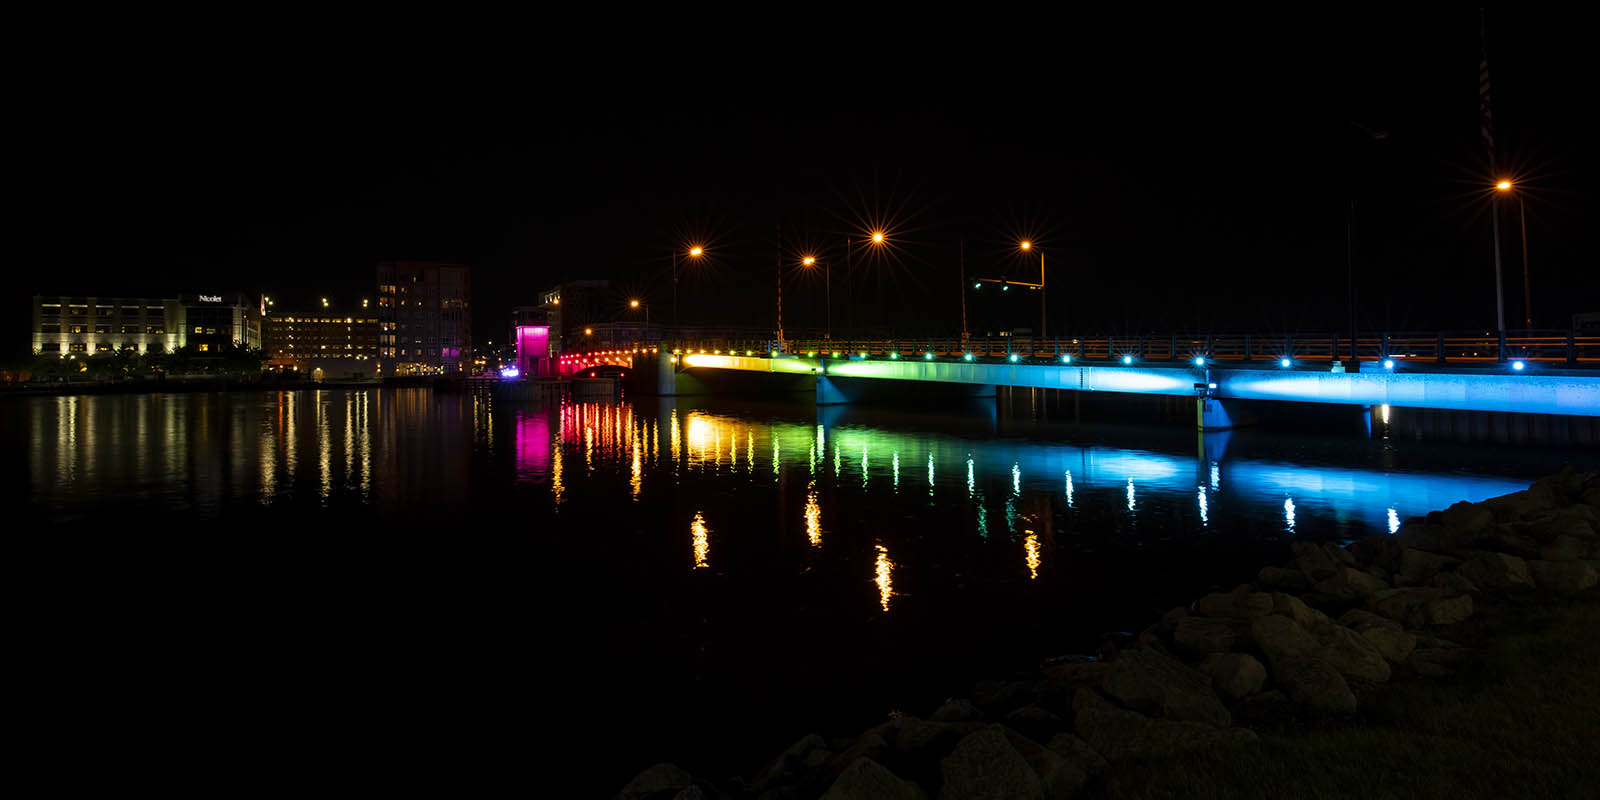 Multi-color LED lighting patterns on the Ray Nitschke (Main St.) bridge in Green Bay, WI